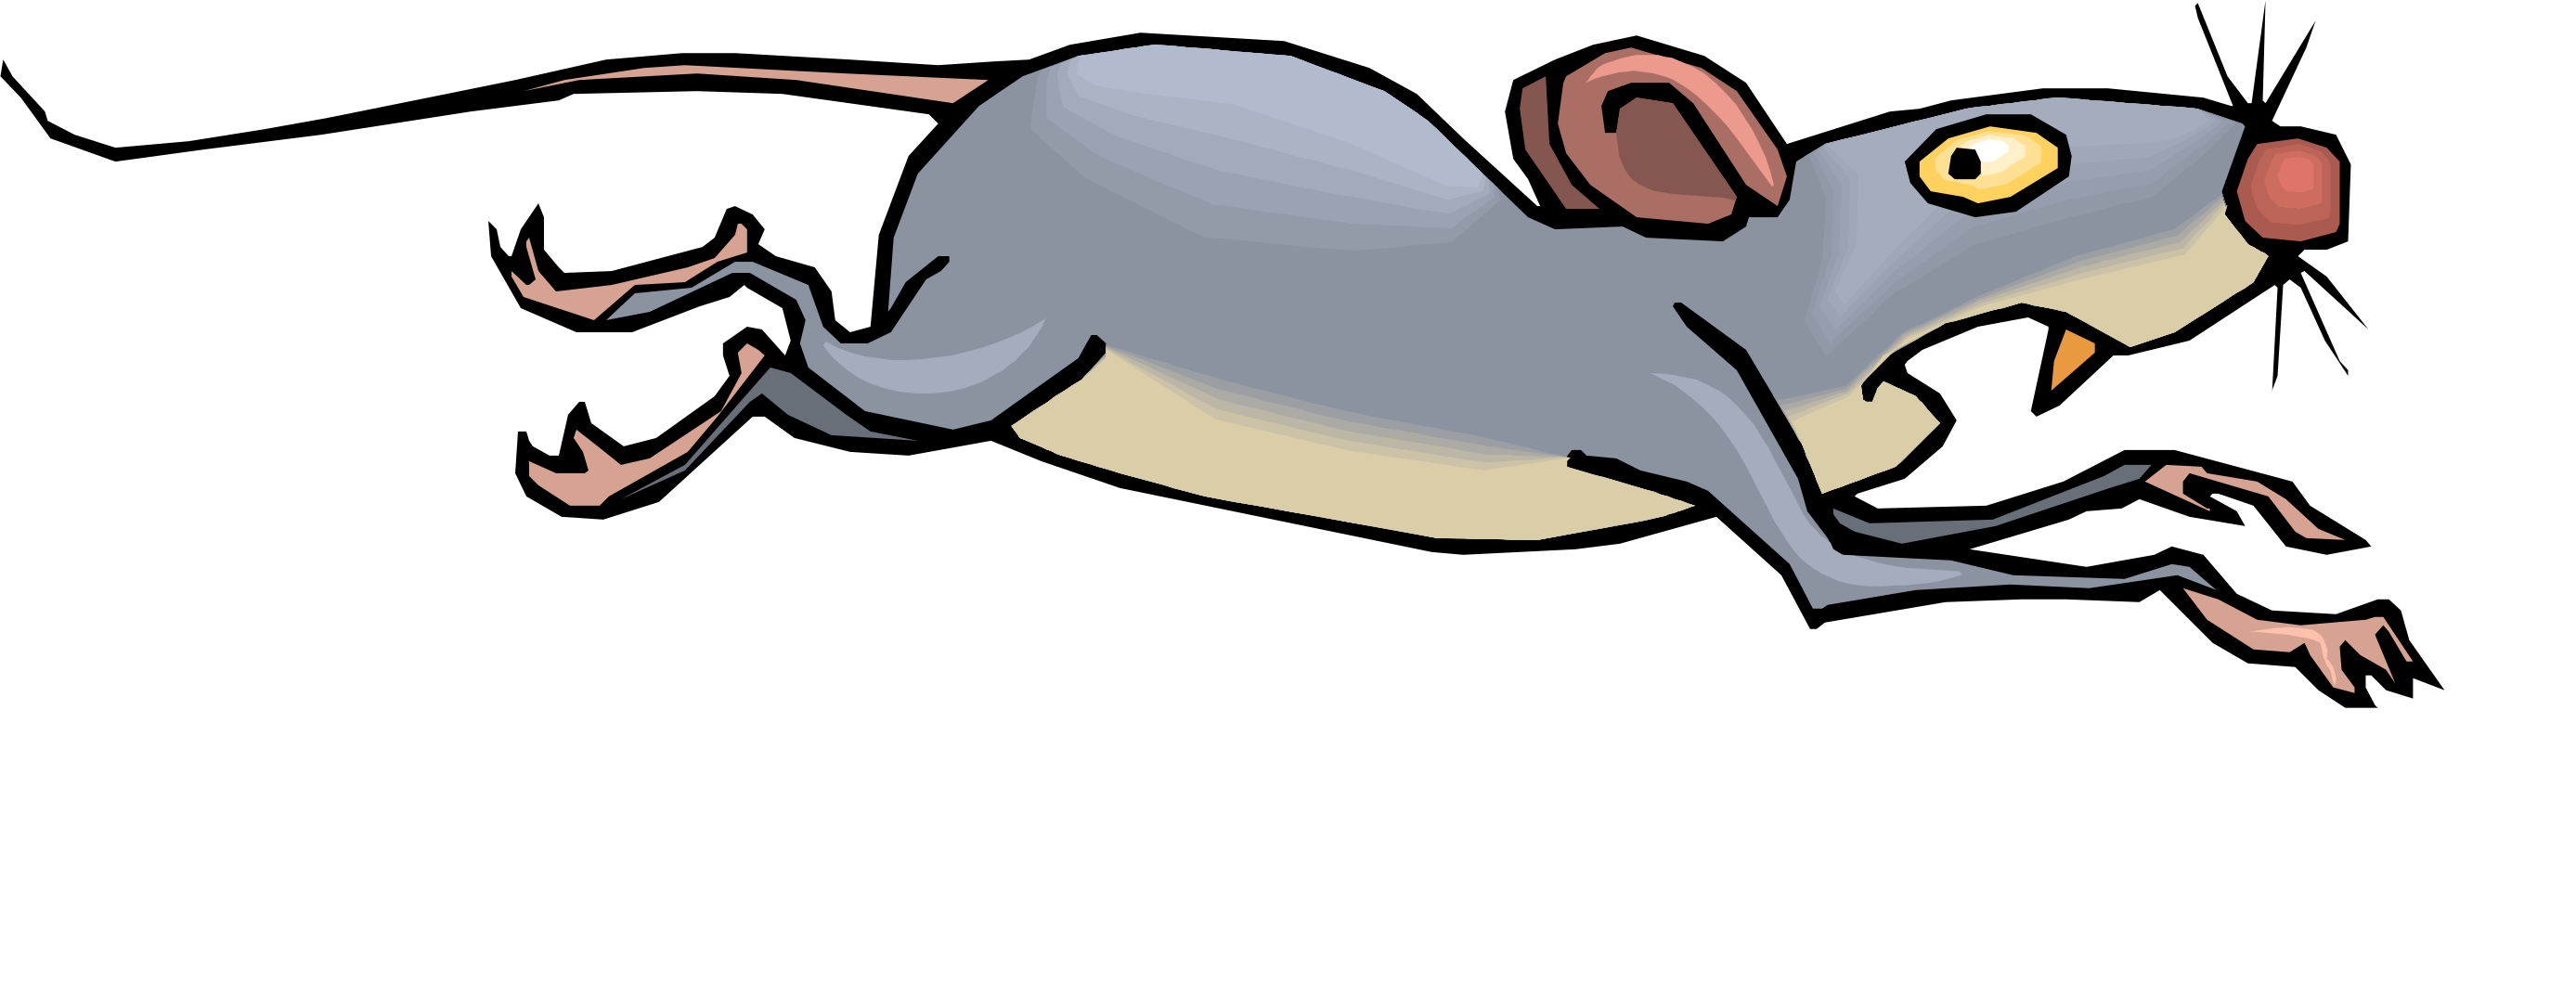 Cartoon Image Of Mouse - ClipArt Best